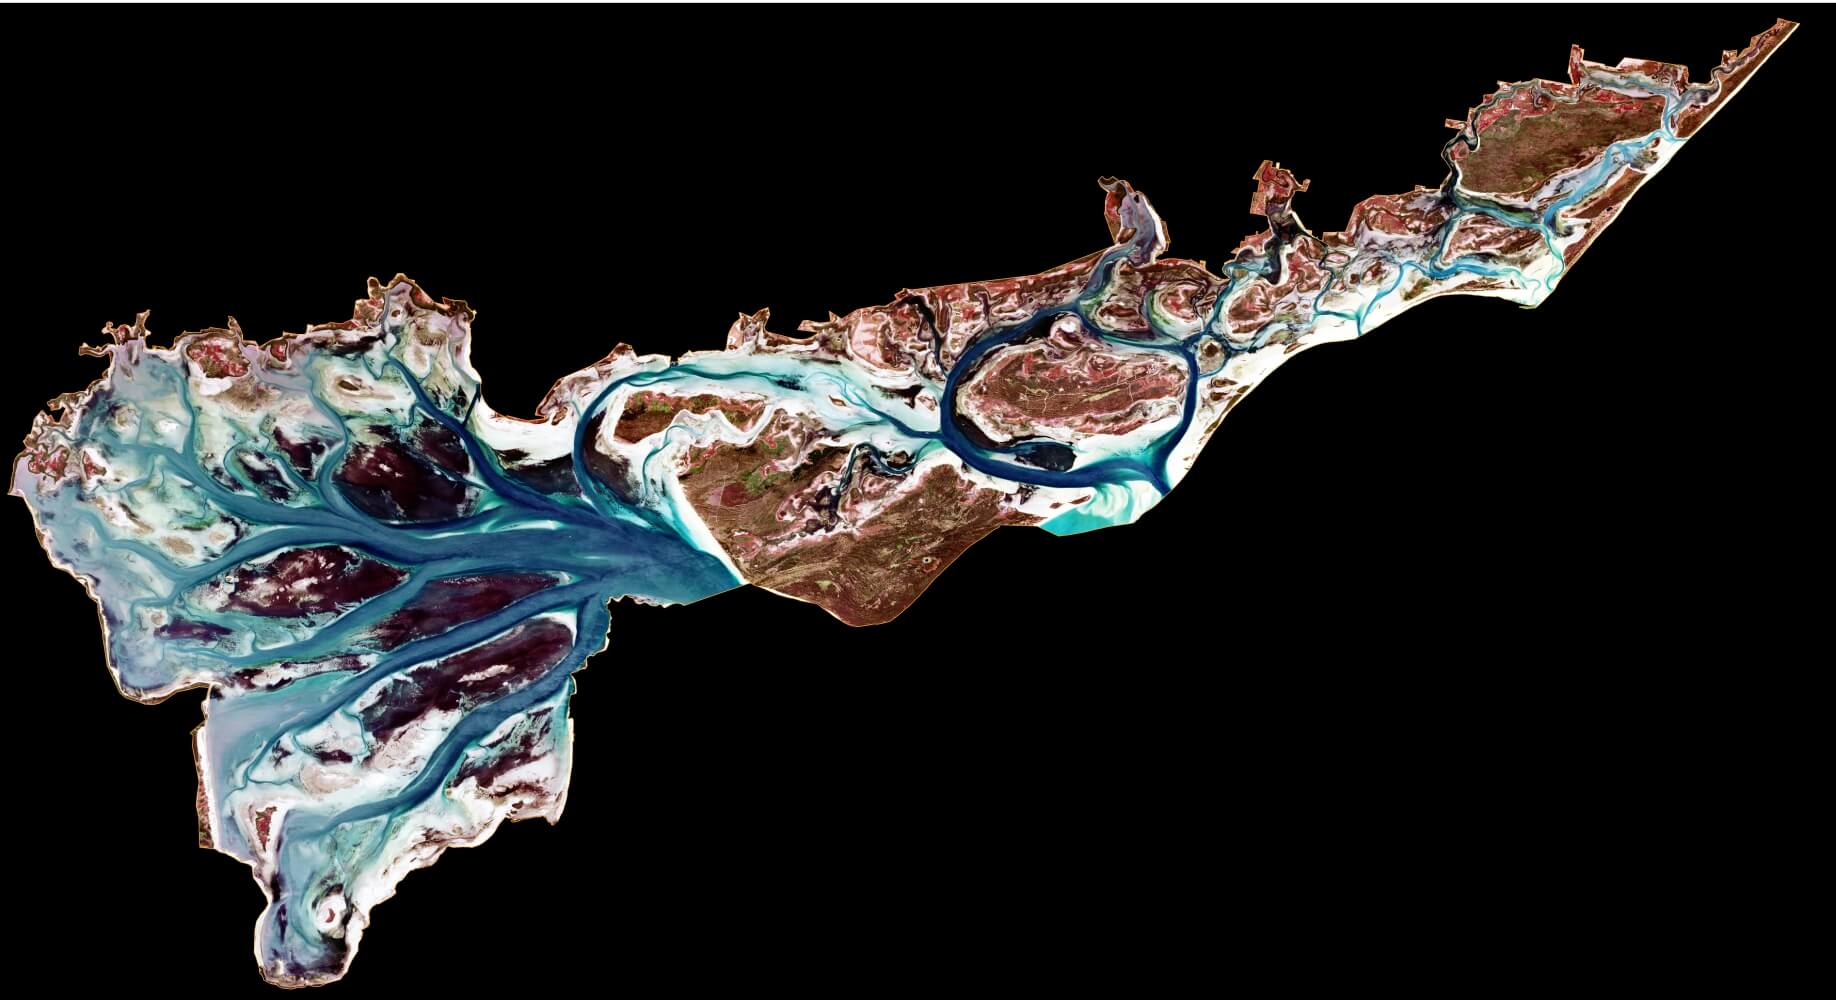 Seagrass mapping from Sentinel-2 at Ramsar sites